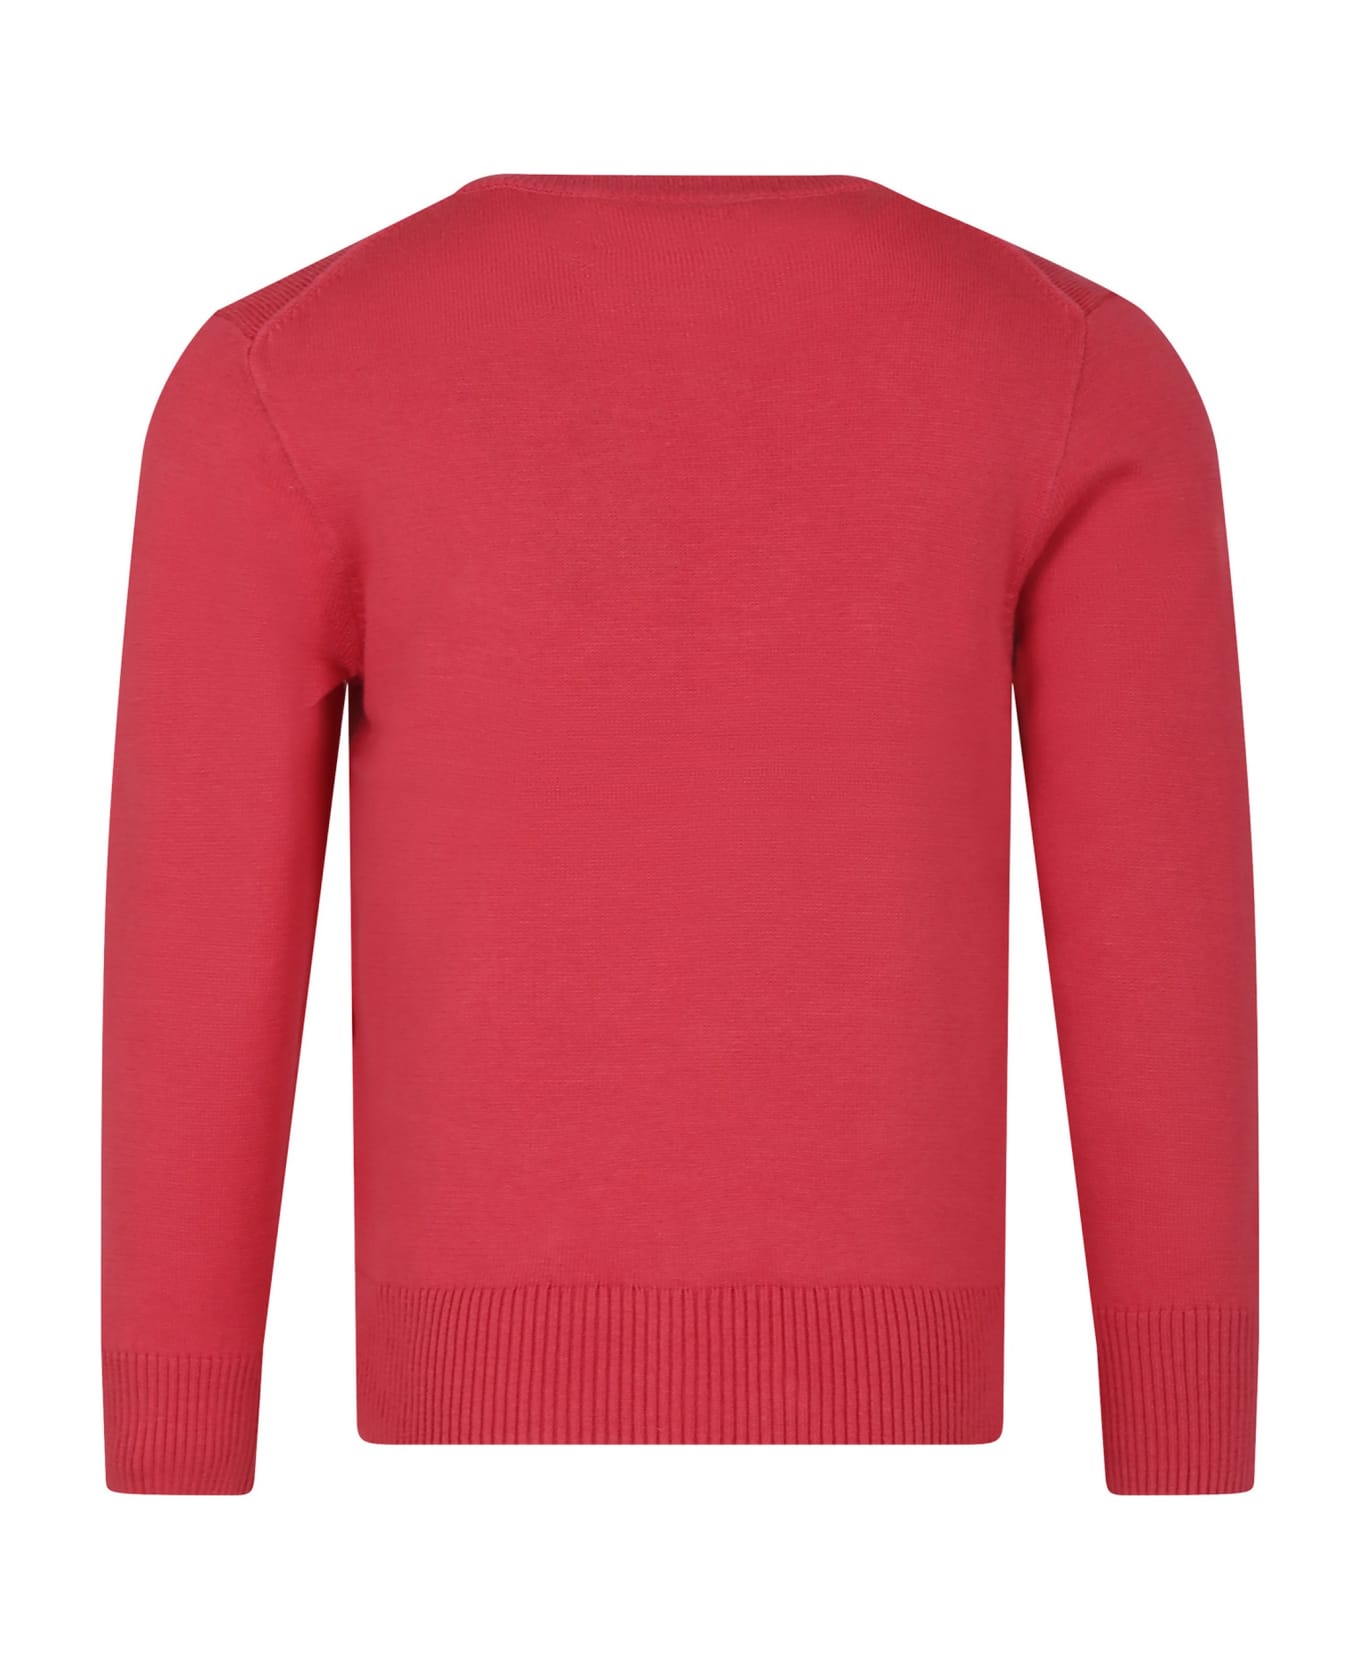 Ralph Lauren Red Sweater For Boy With Embroidery - Red